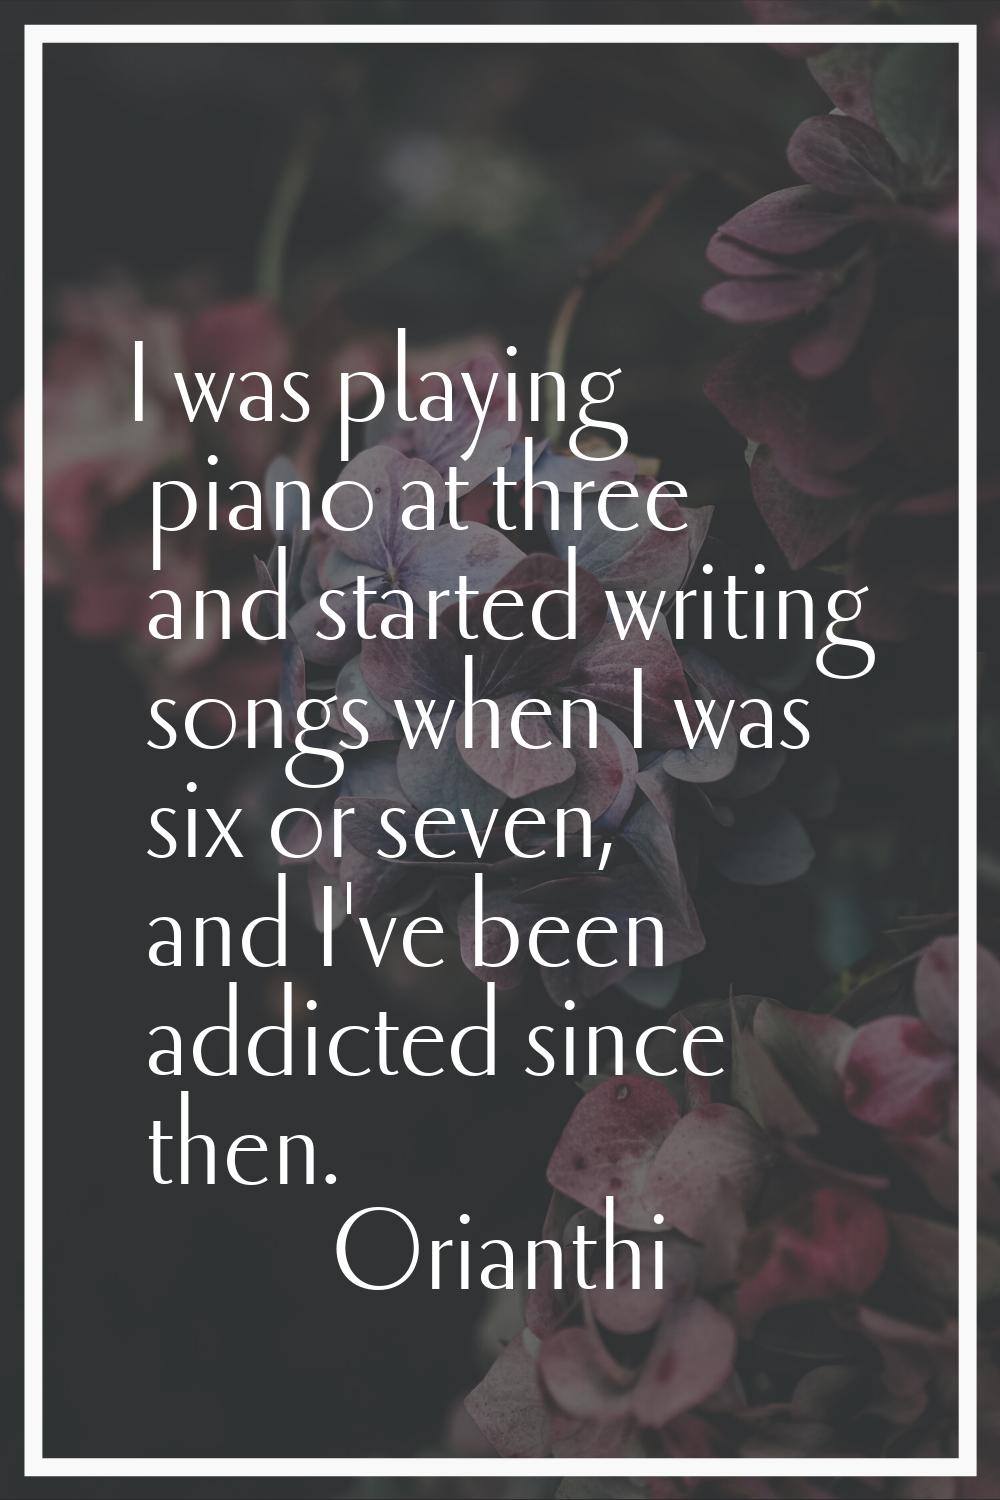 I was playing piano at three and started writing songs when I was six or seven, and I've been addic